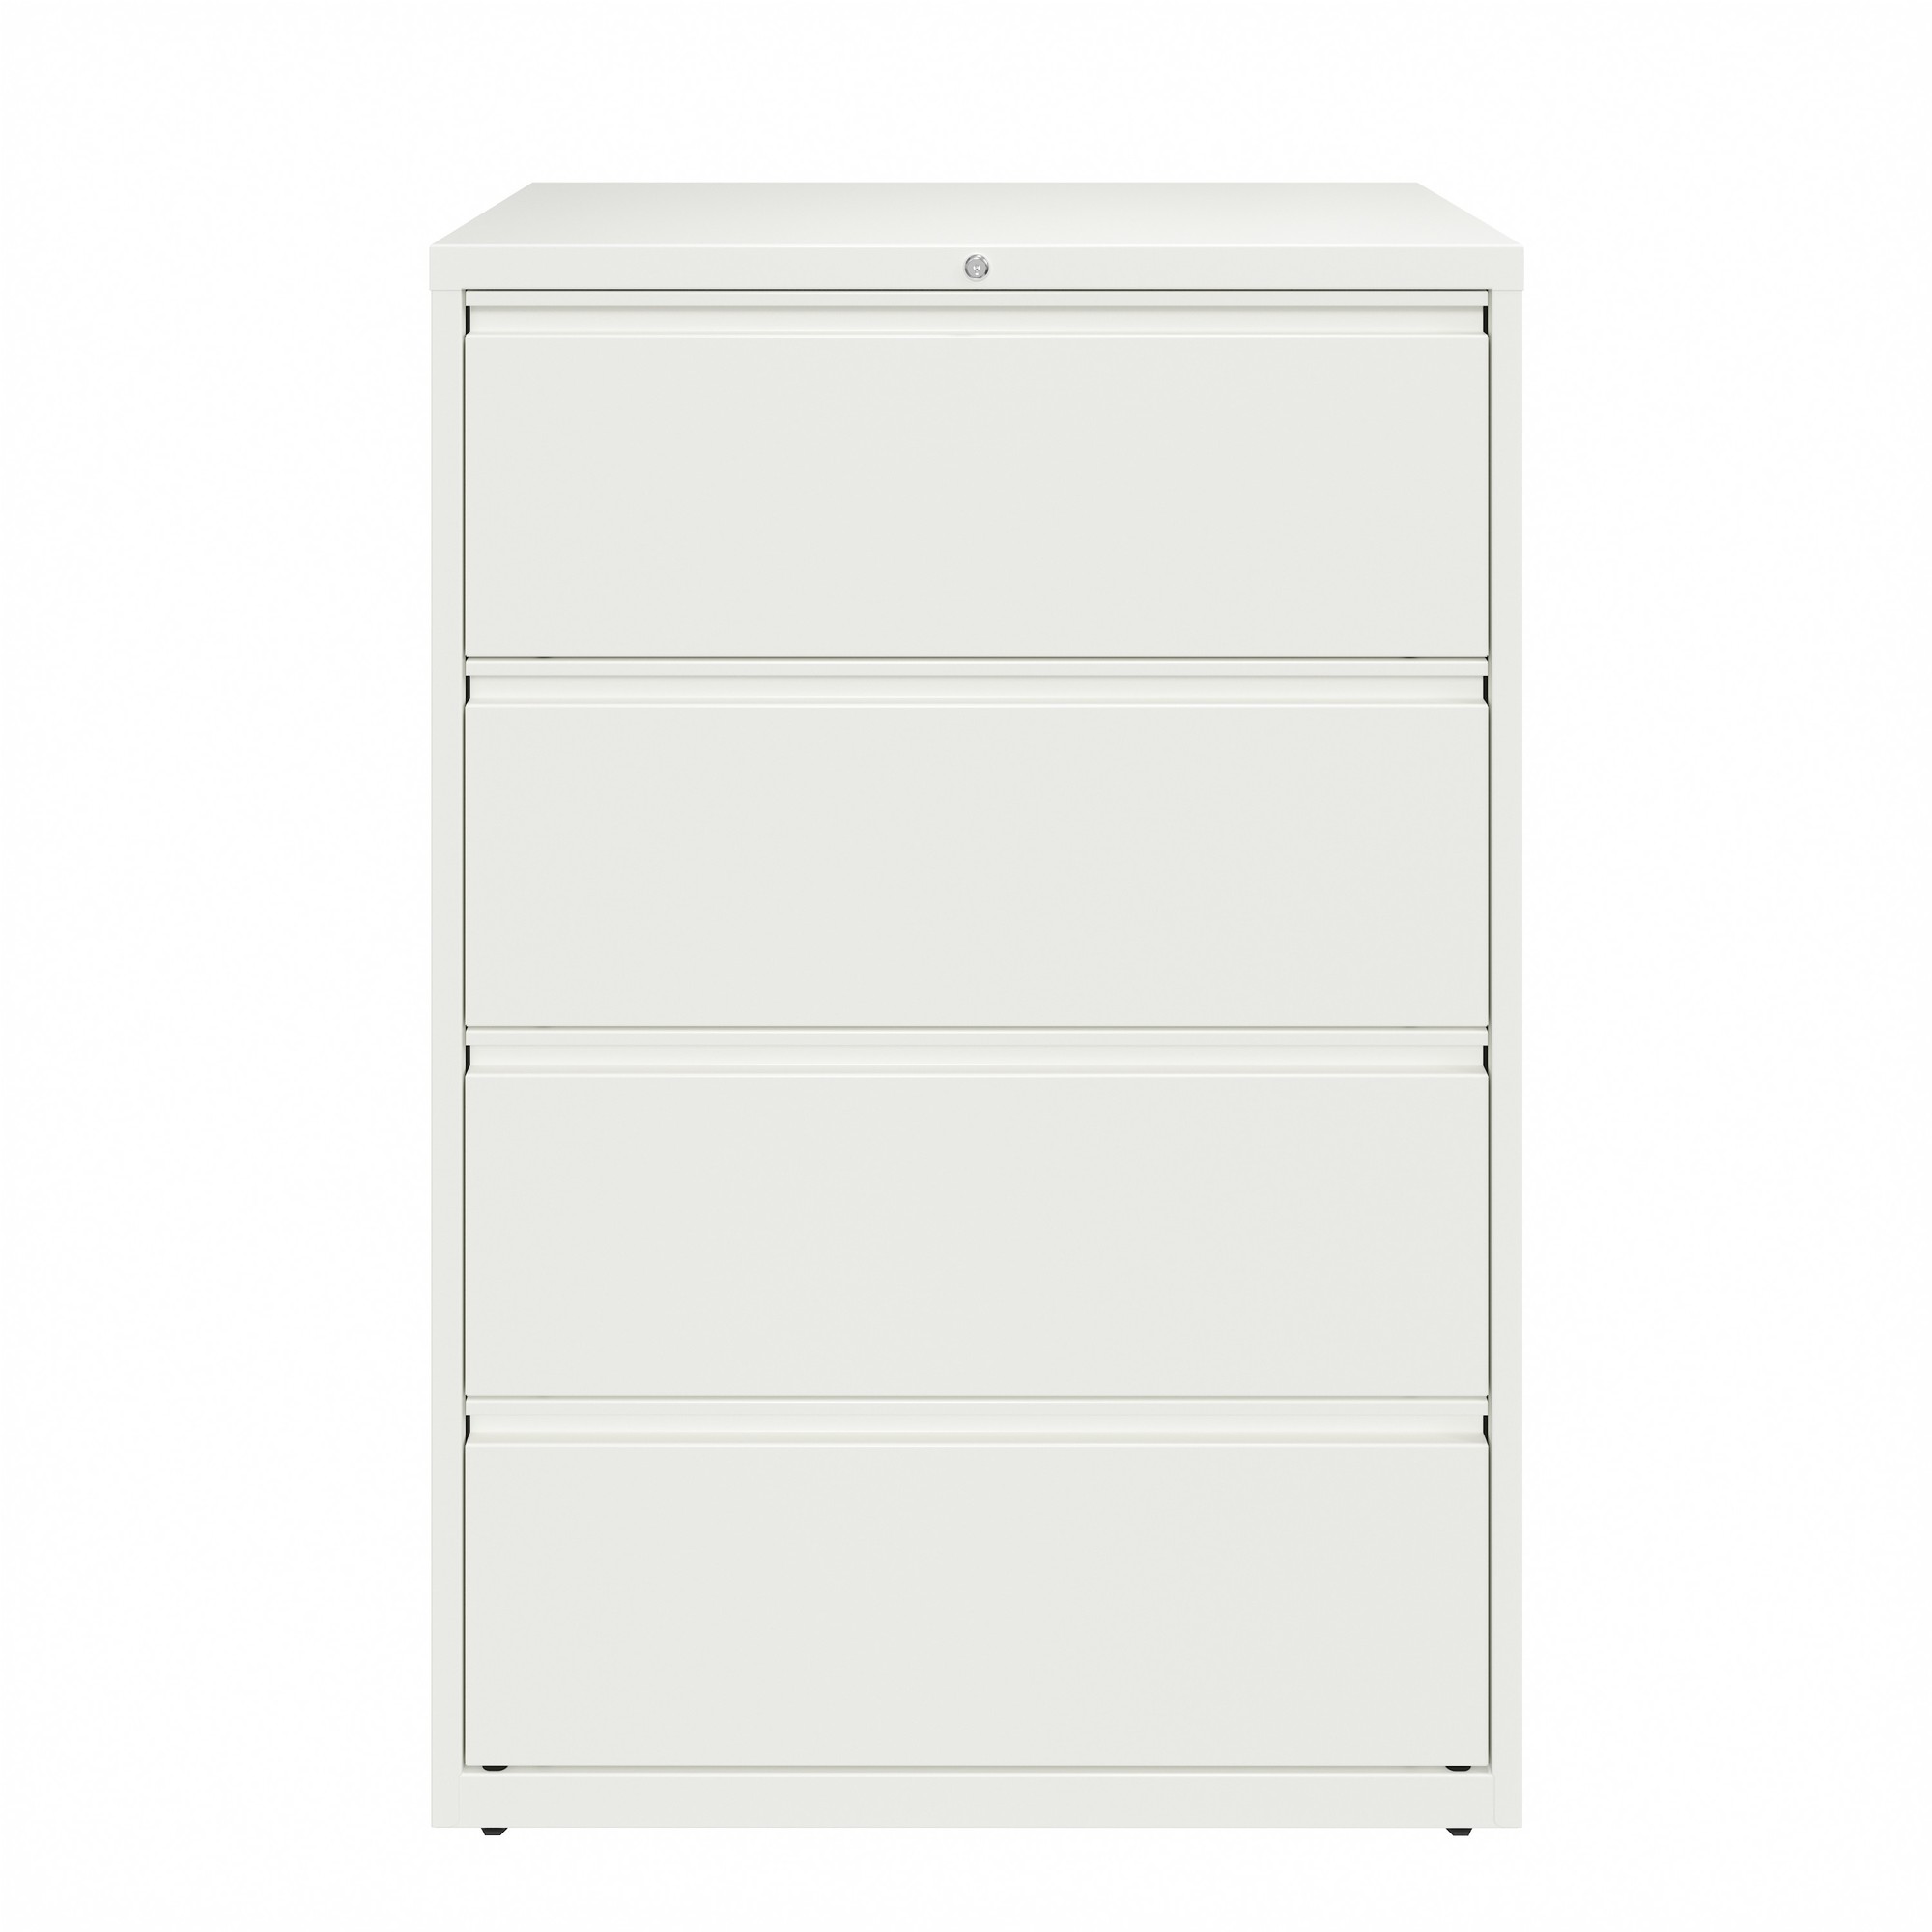 4 Drawer Lateral File Cabinet, Width 36 in, Depth 18.625 in, Height 52.5 in, Model - Hirsh Industries 23702